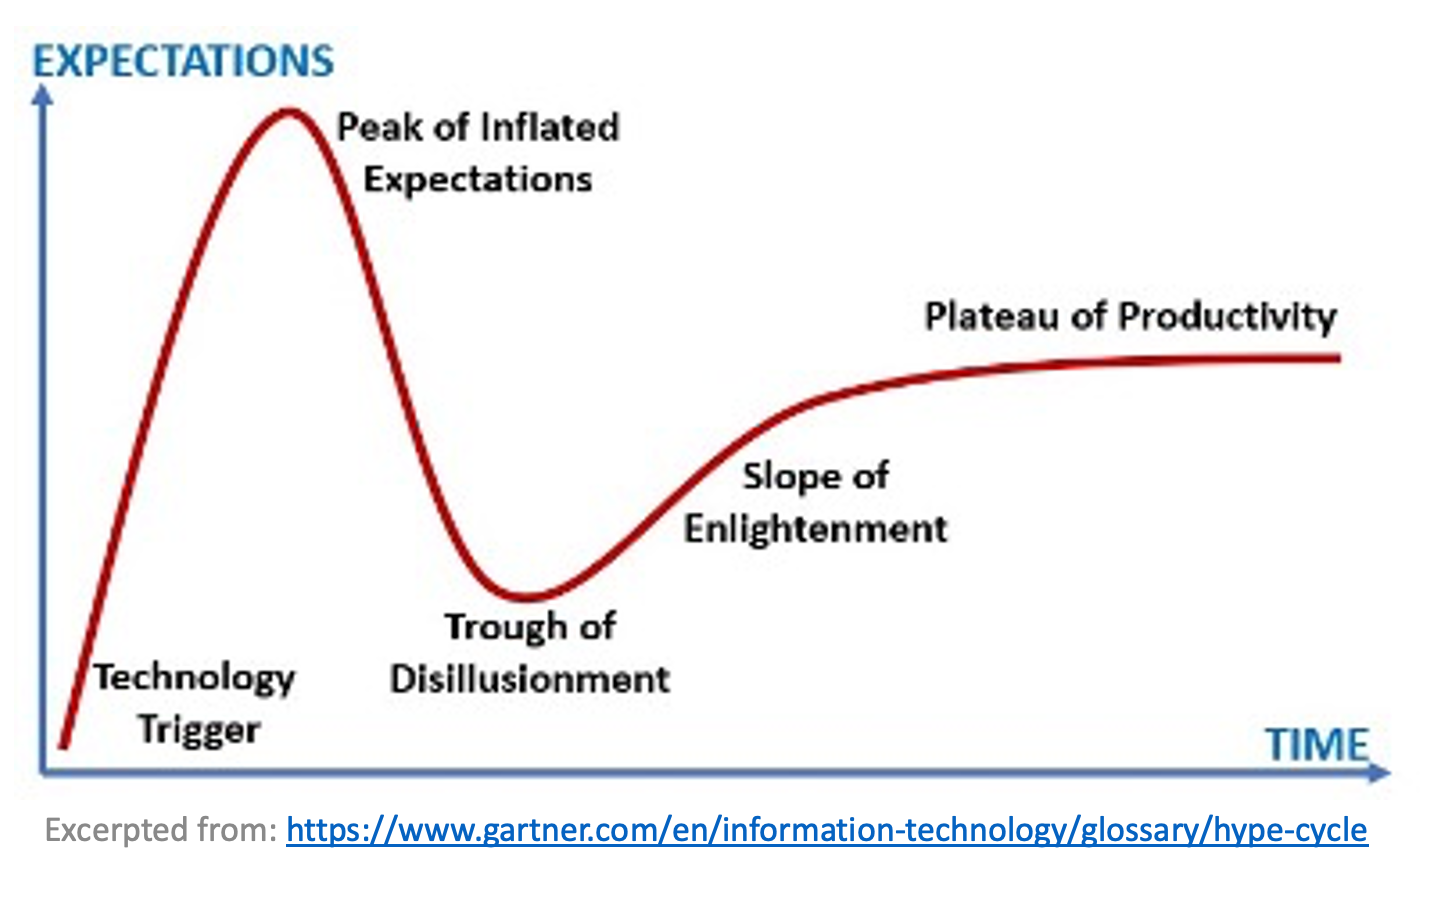 Figure 2. The Hype Cycle